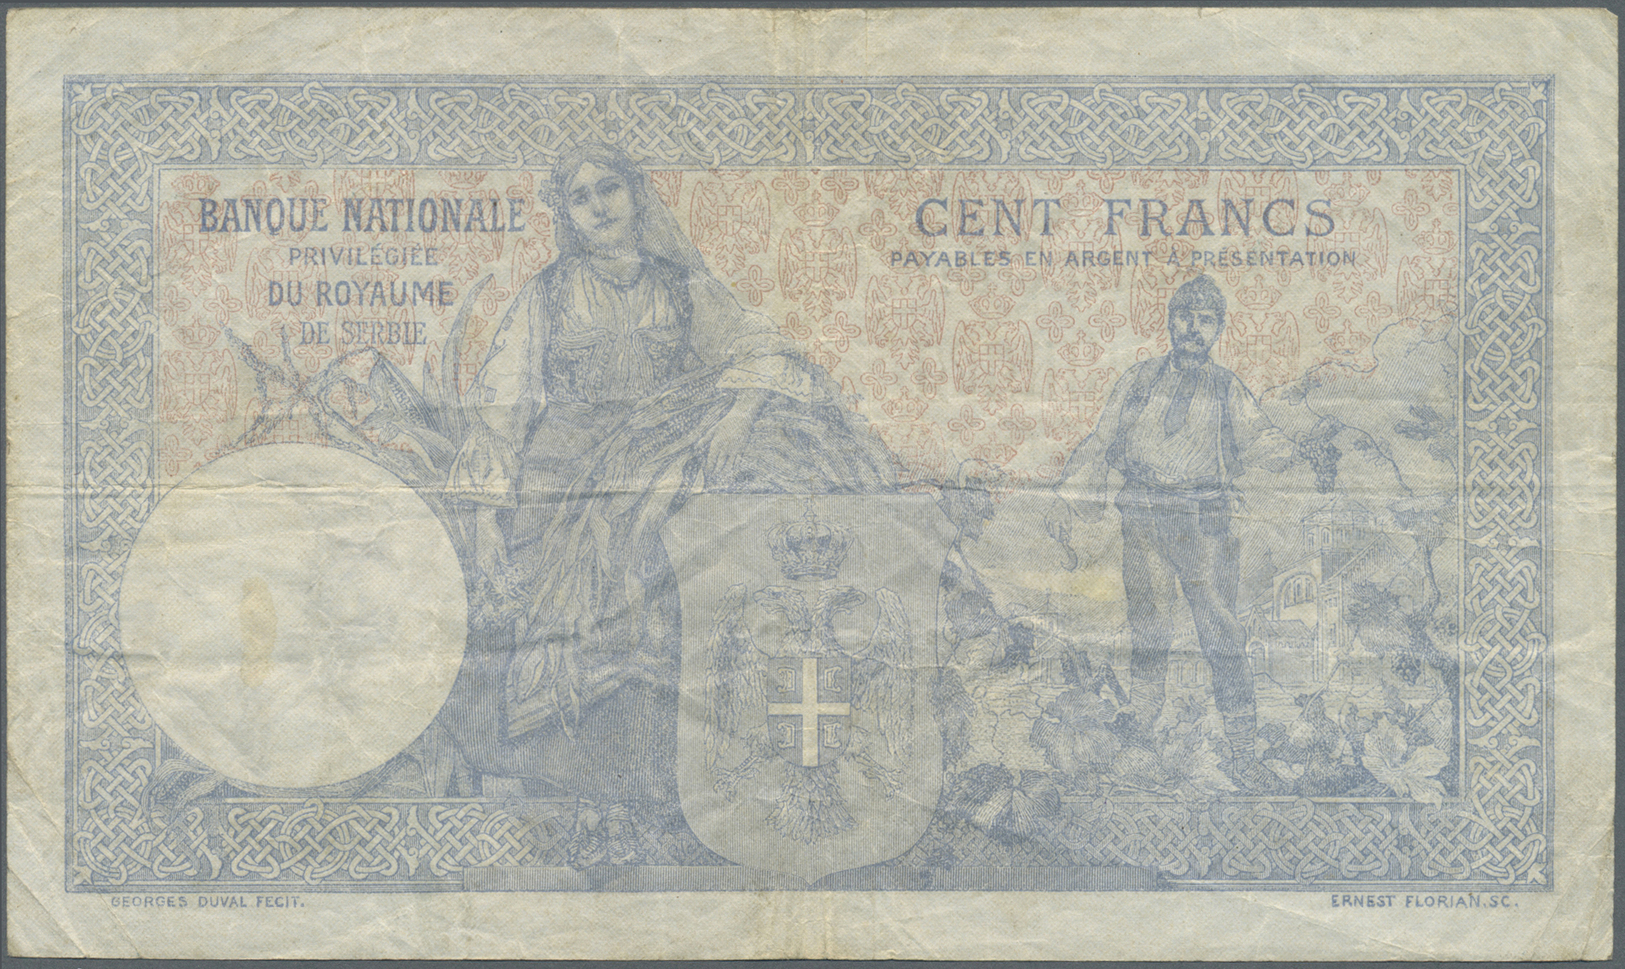 02885 Serbia / Serbien: 100 Francs 1905 P. 12 A, Used With Stronger Center Fold, Several Other Folds, No Holes Or Tears, - Serbie